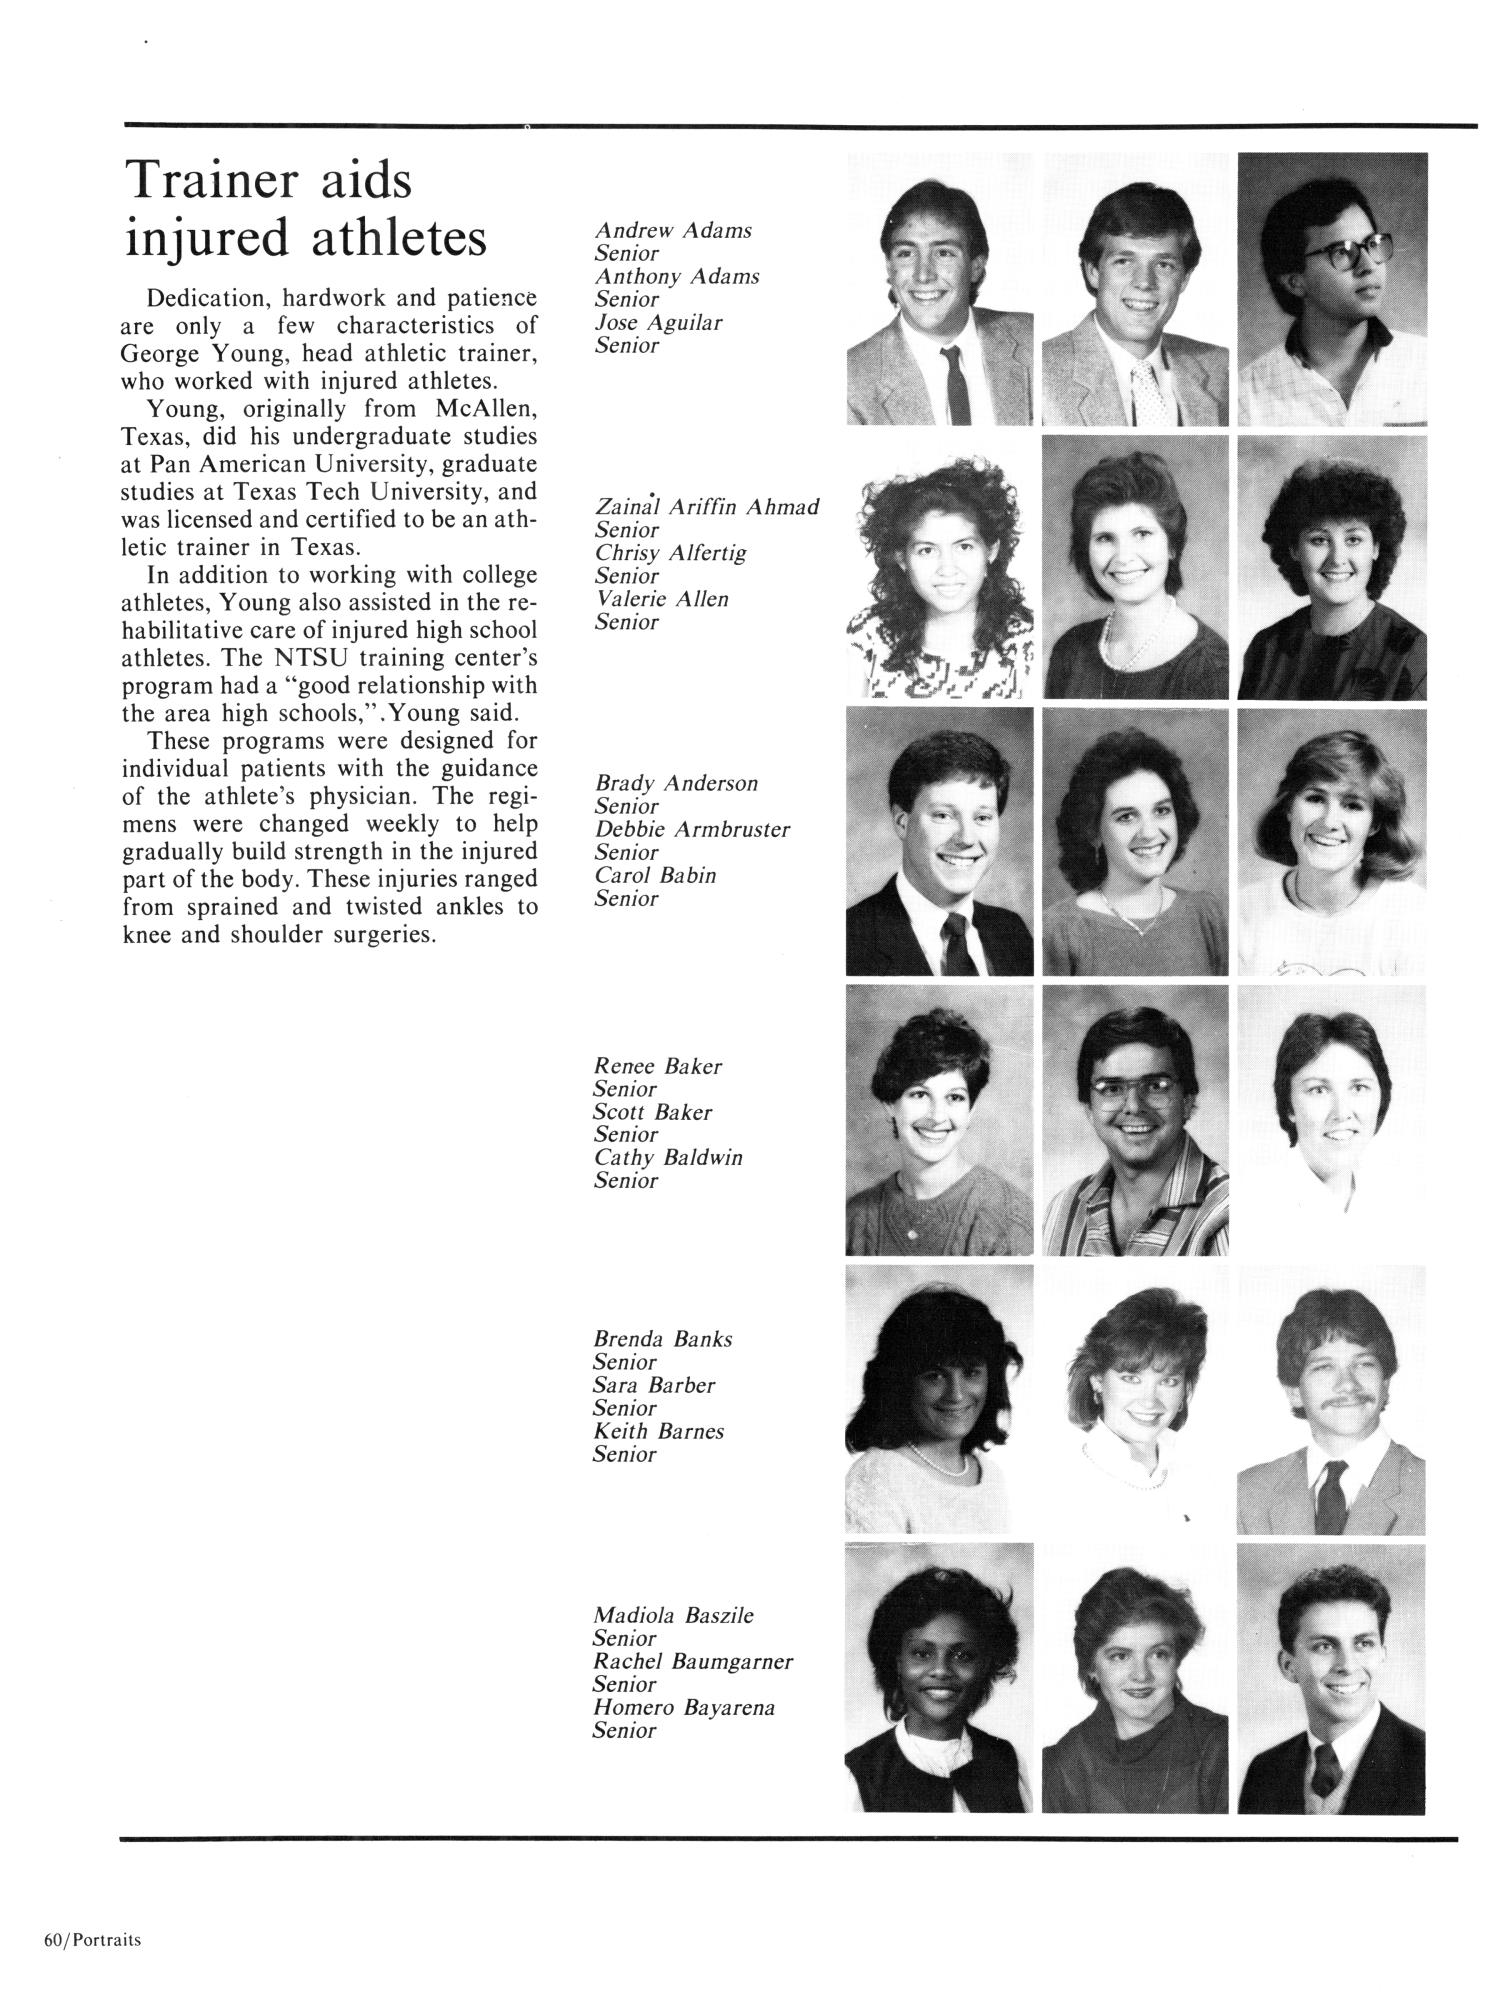 the-aerie-yearbook-of-north-texas-state-university-1986-page-60